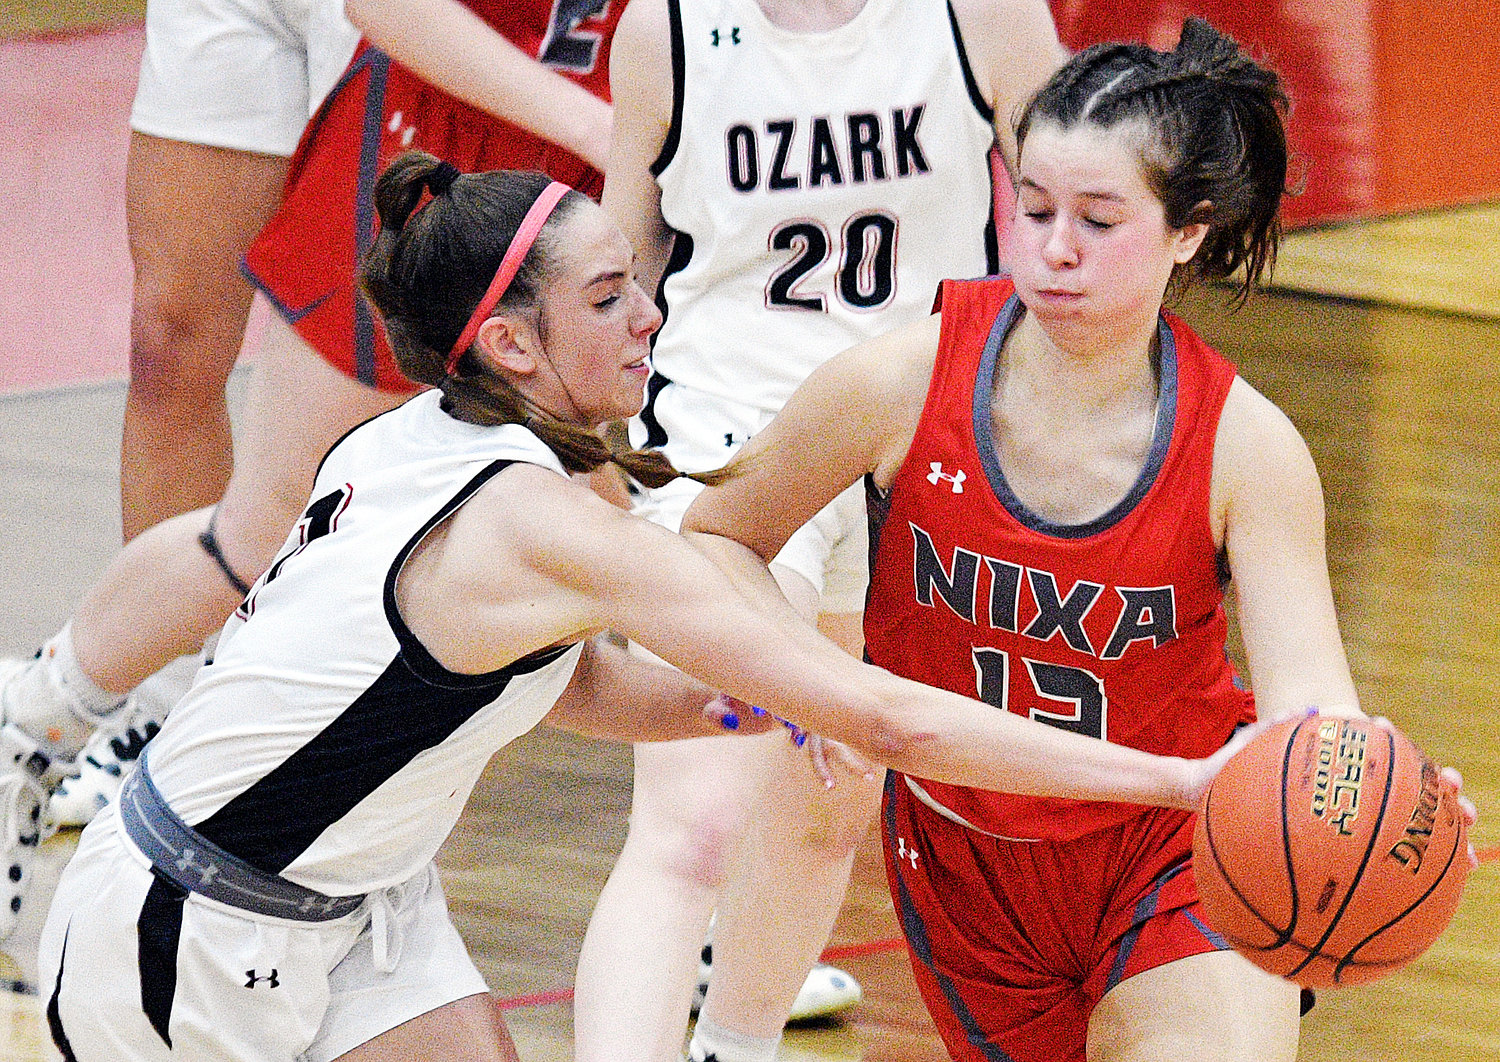 OZARK’S RILEY BOGGS collects a steal in the Lady Tigers’ home contest with Nixa on Monday.